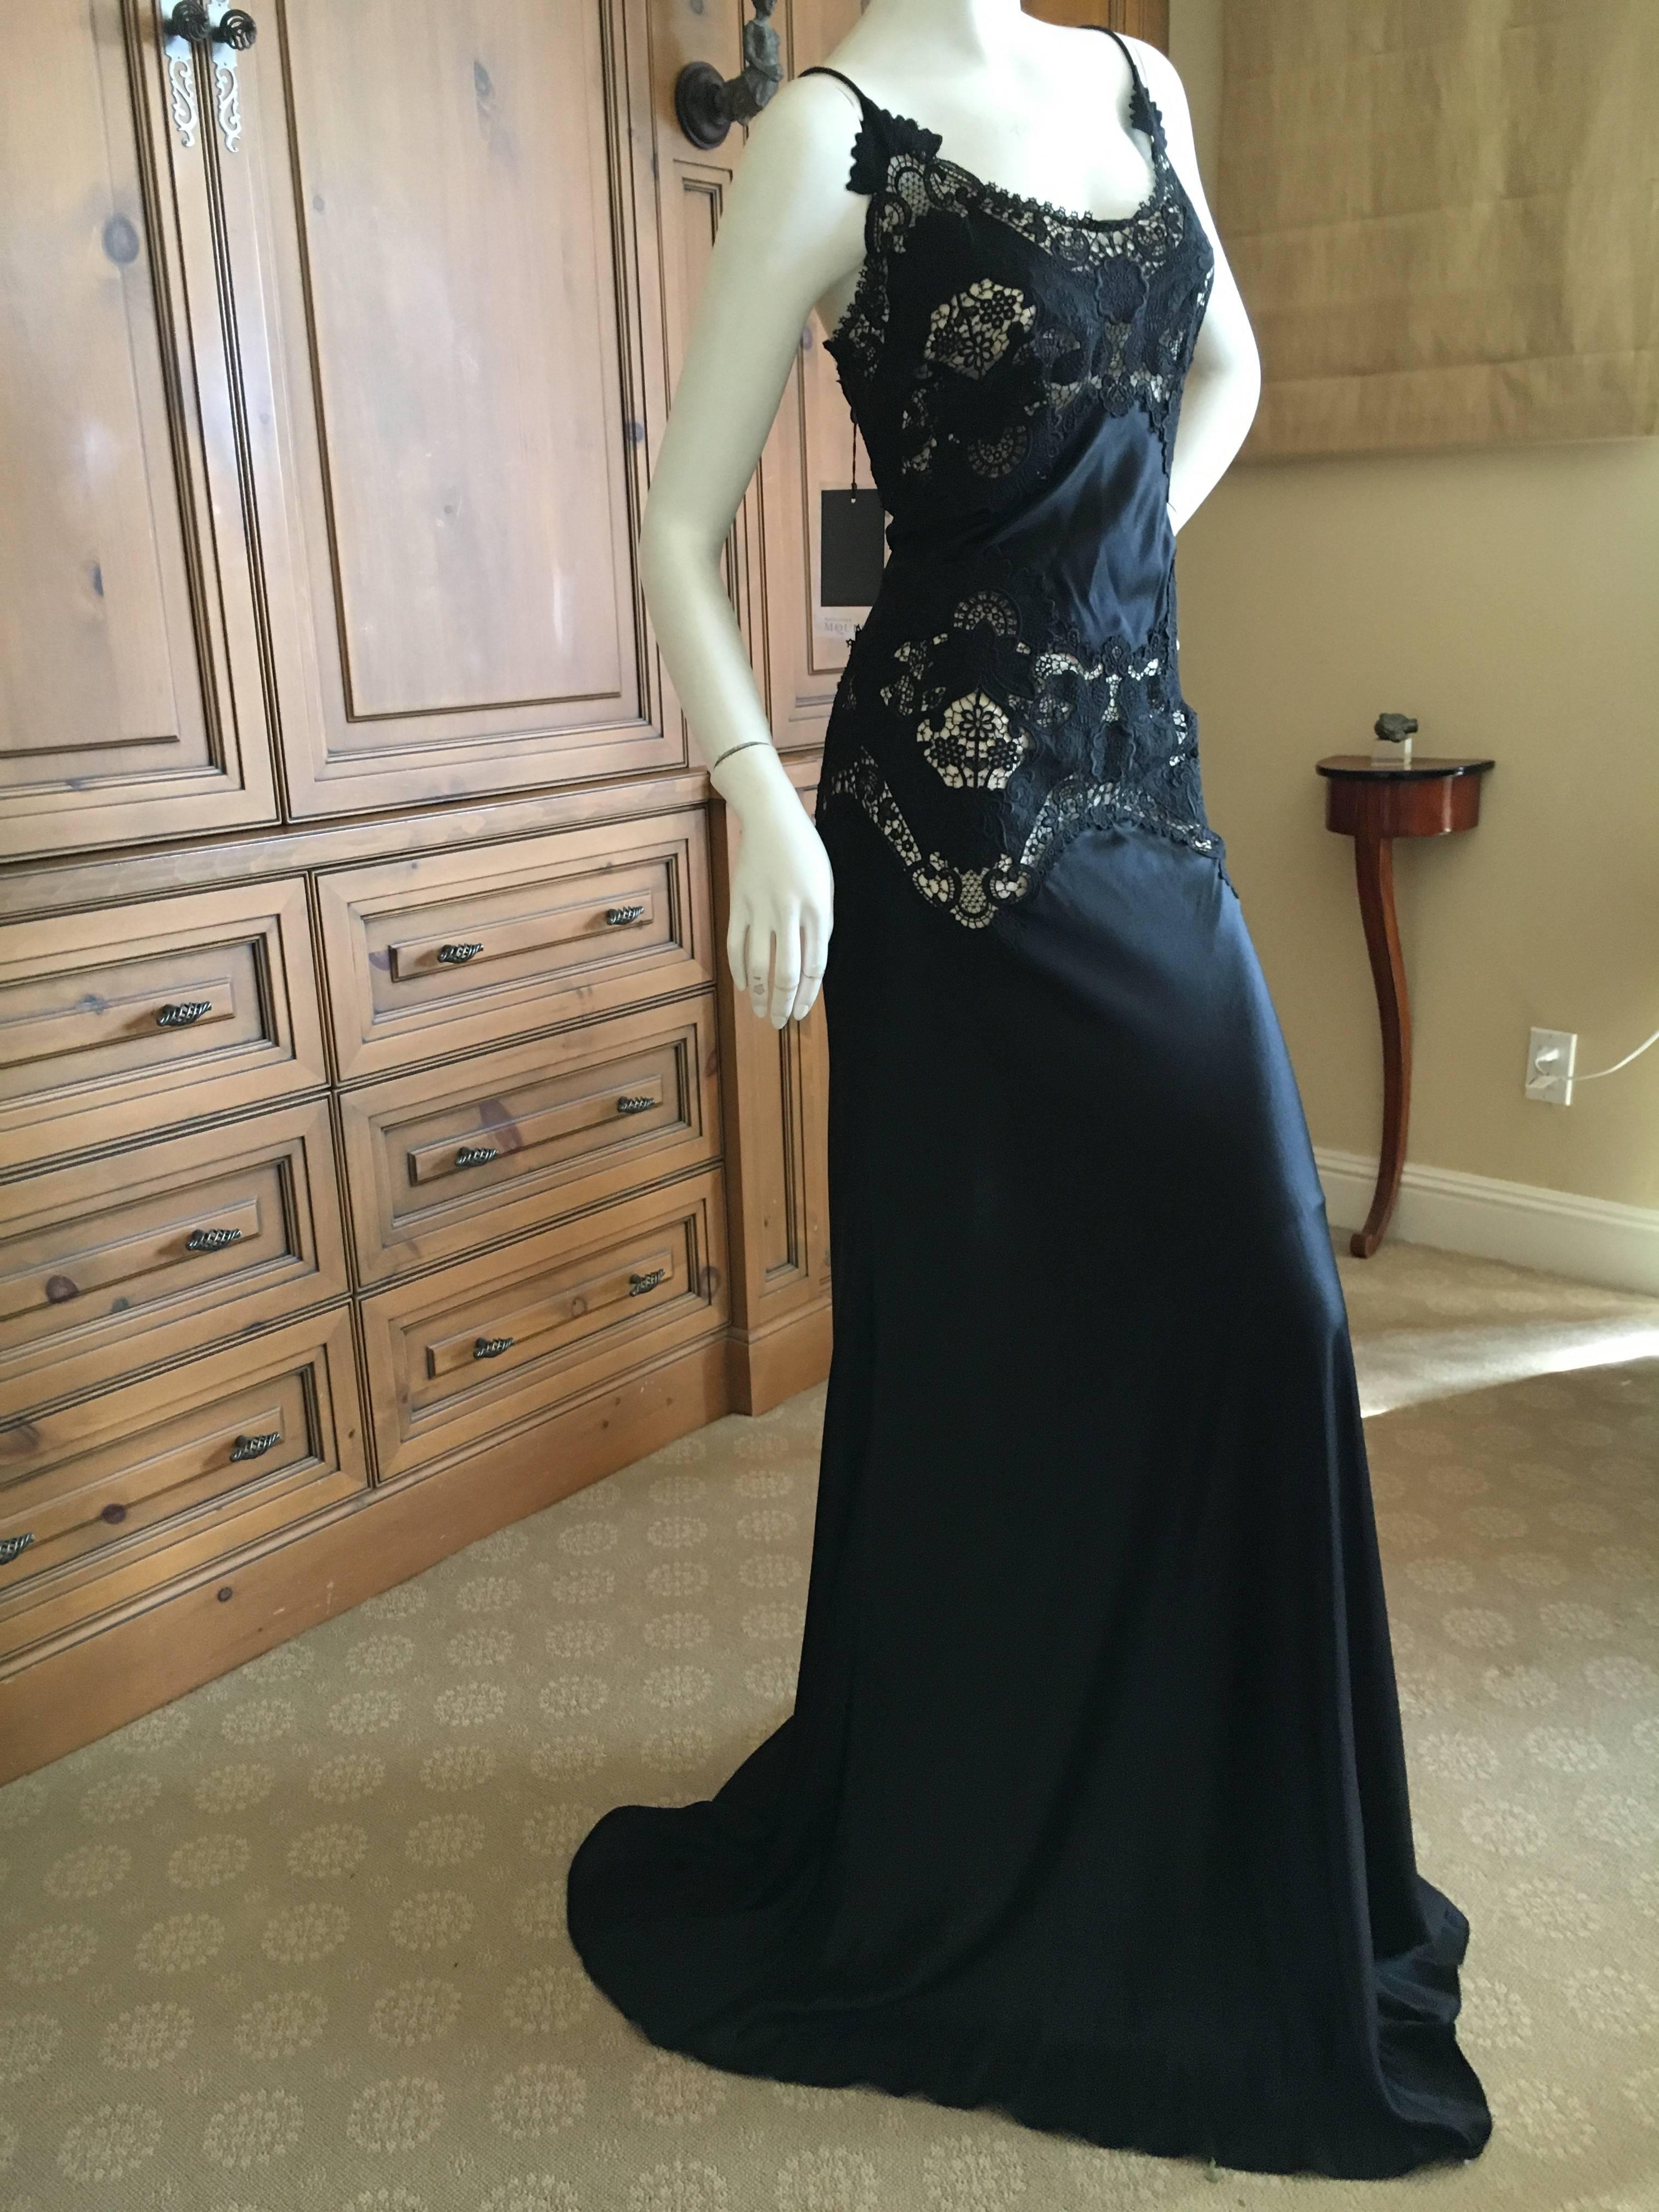 Alexander McQueen Black Evening Dress with Sheer Guipure Lace Details 2004 Sz 46 For Sale 3